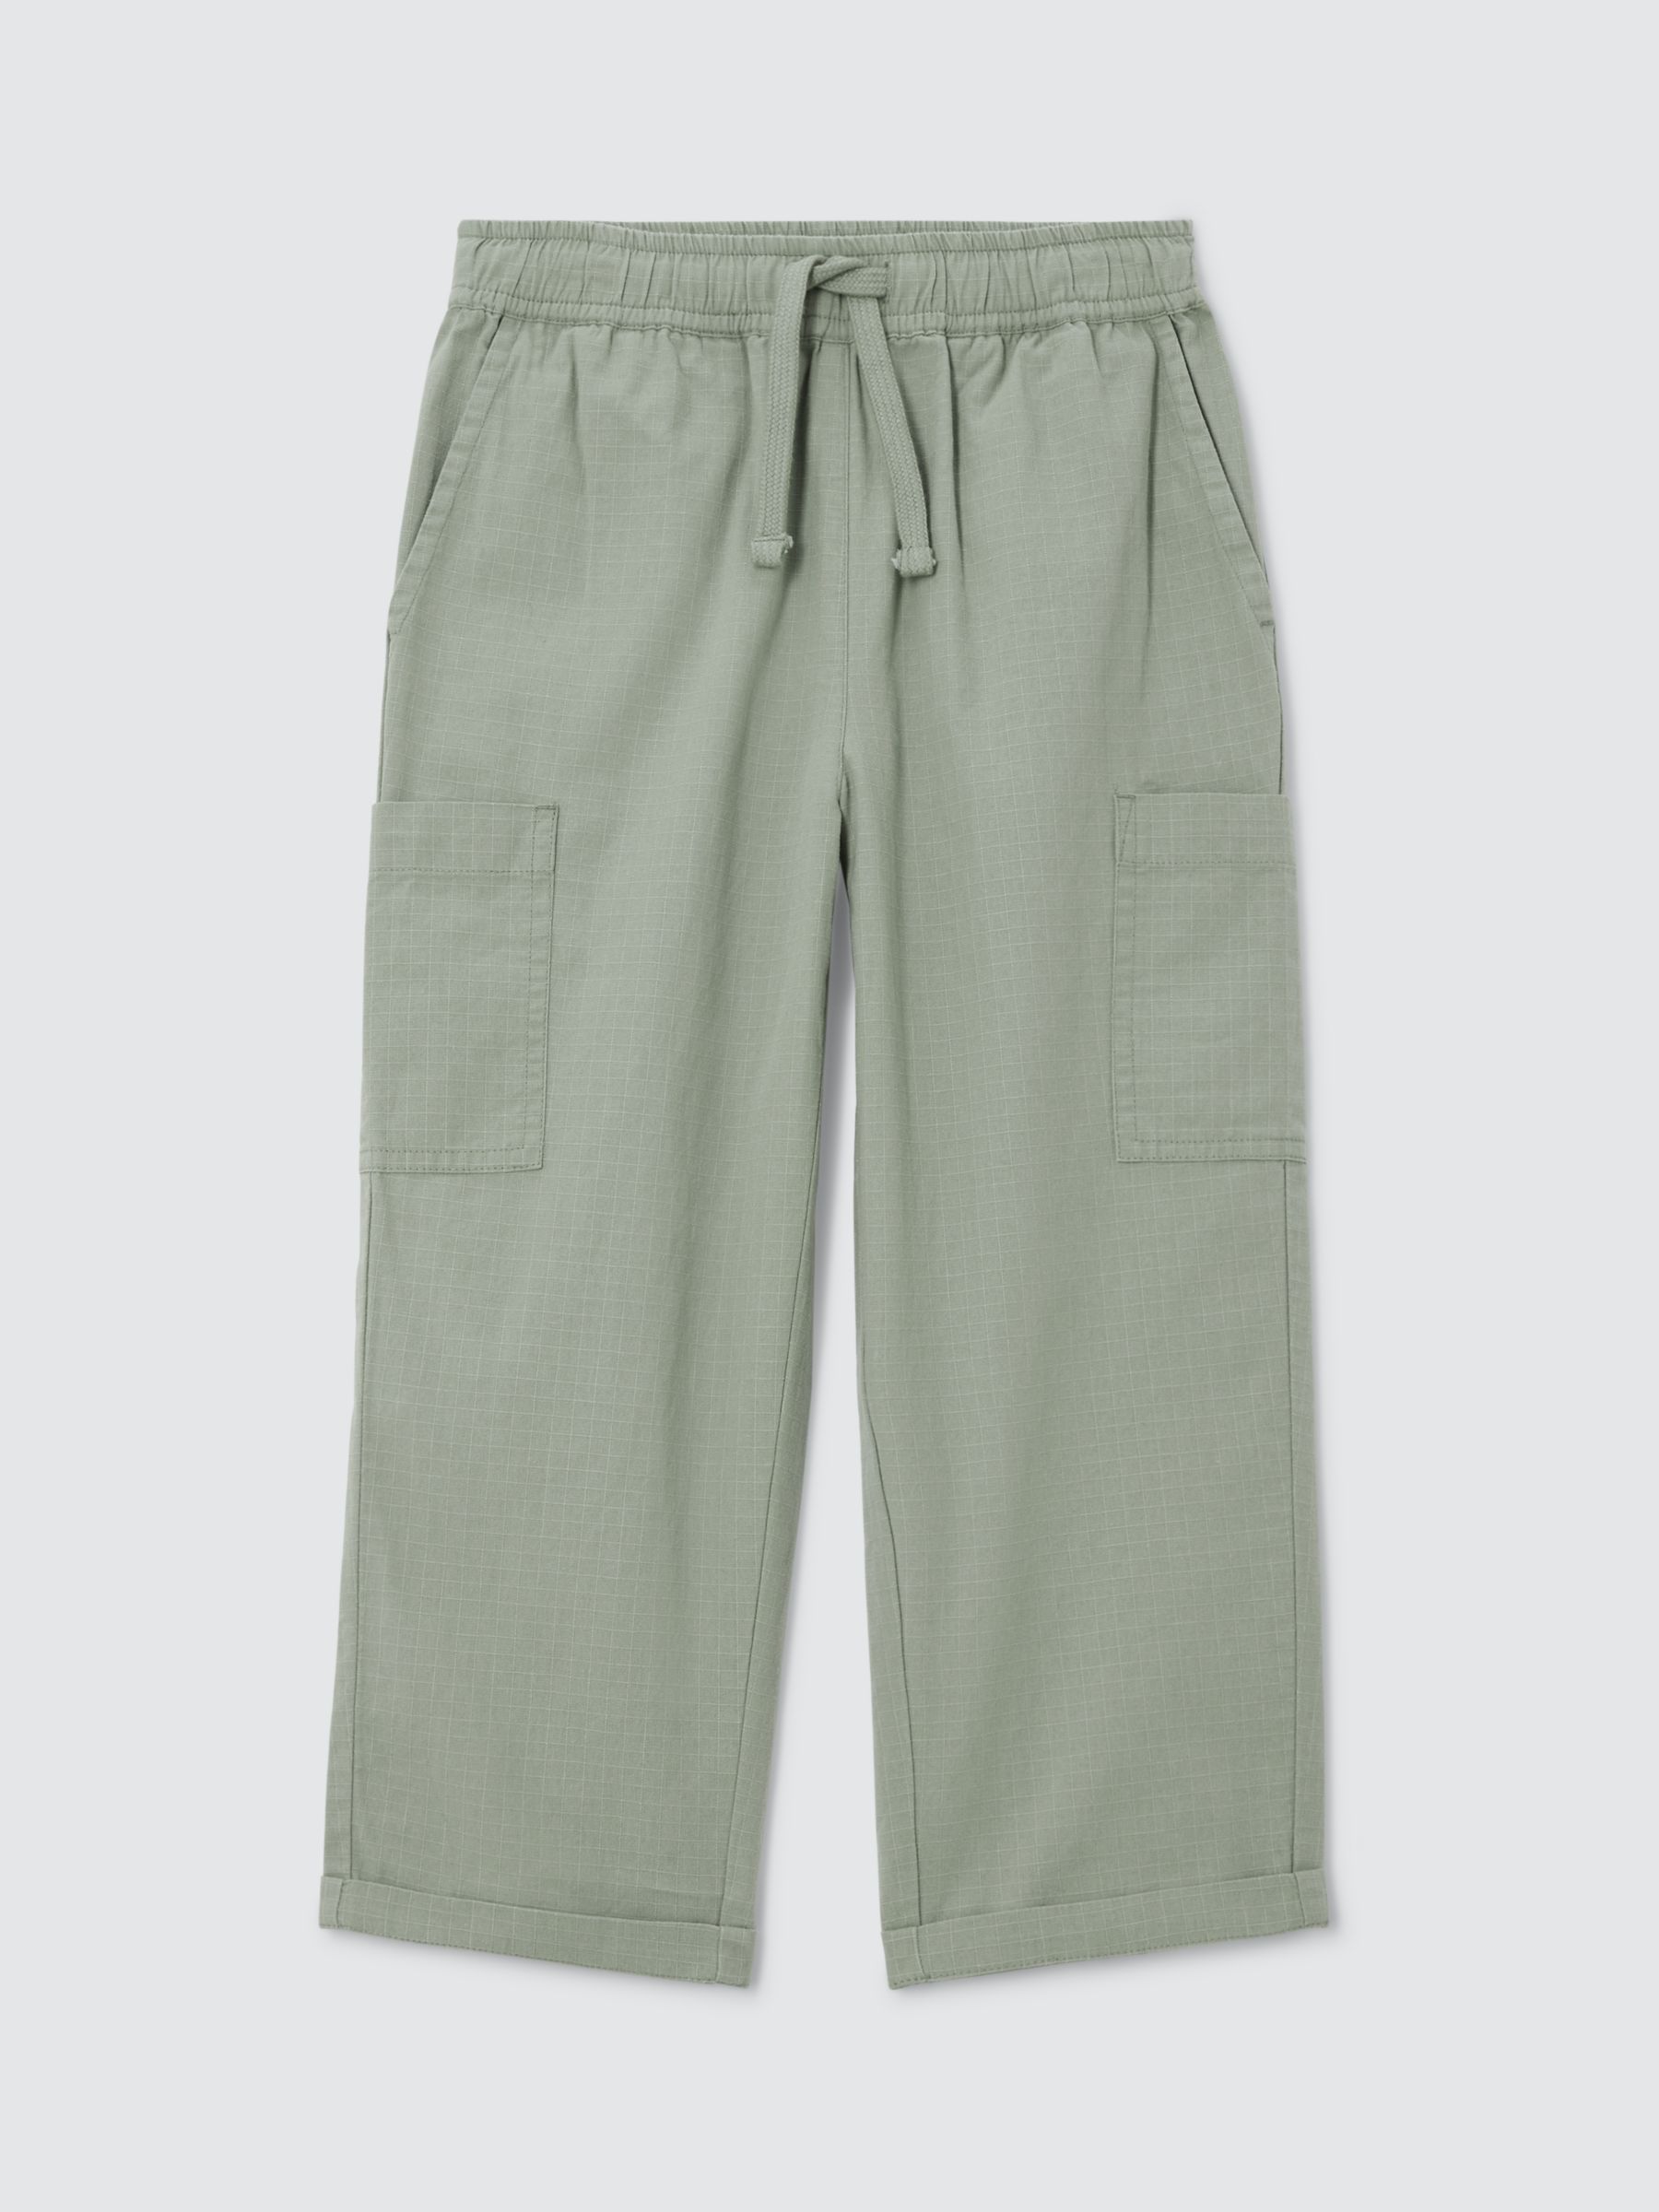 John Lewis ANYDAY Kids' Ripstop Cotton Trousers, Iceberg Green, 2 years